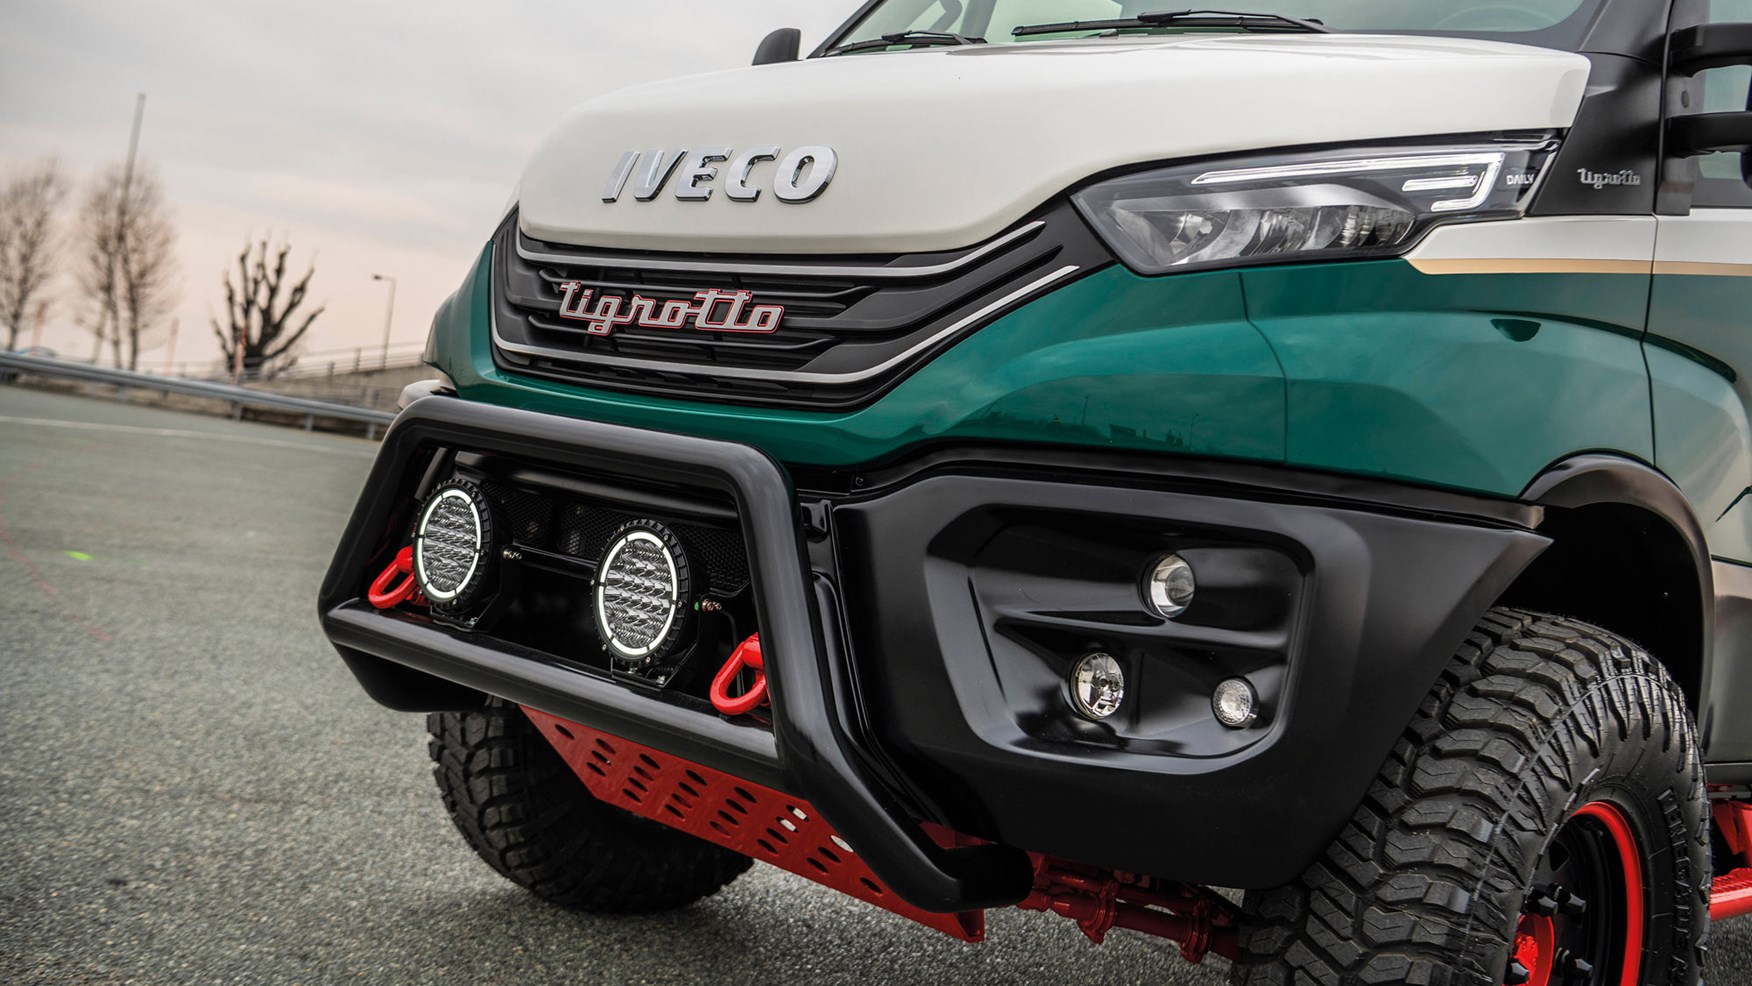 Iveco produces Daily 4x4 Tigrotto in right-hand drive